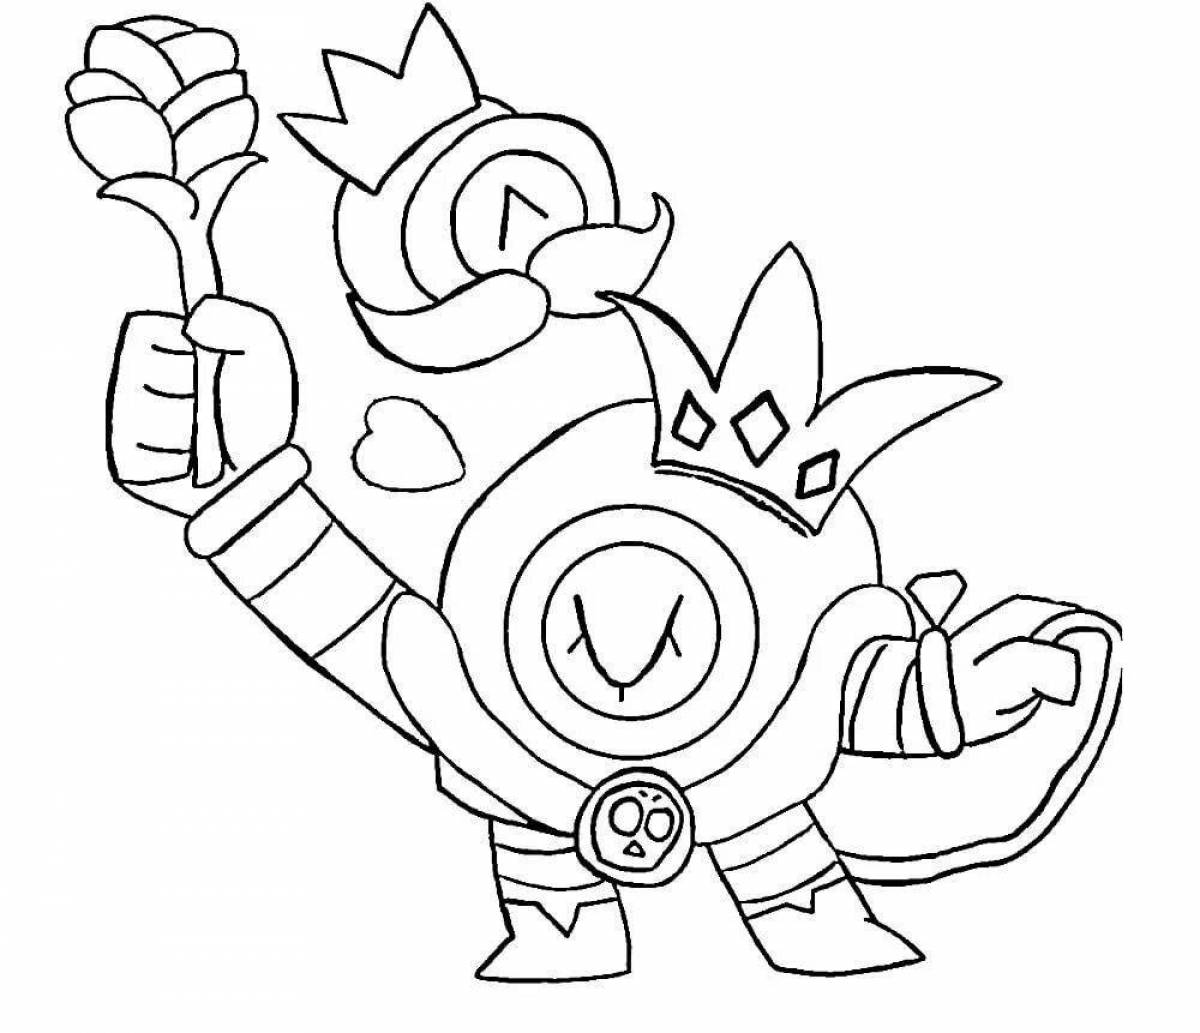 Luxury brawl stars skin coloring pages